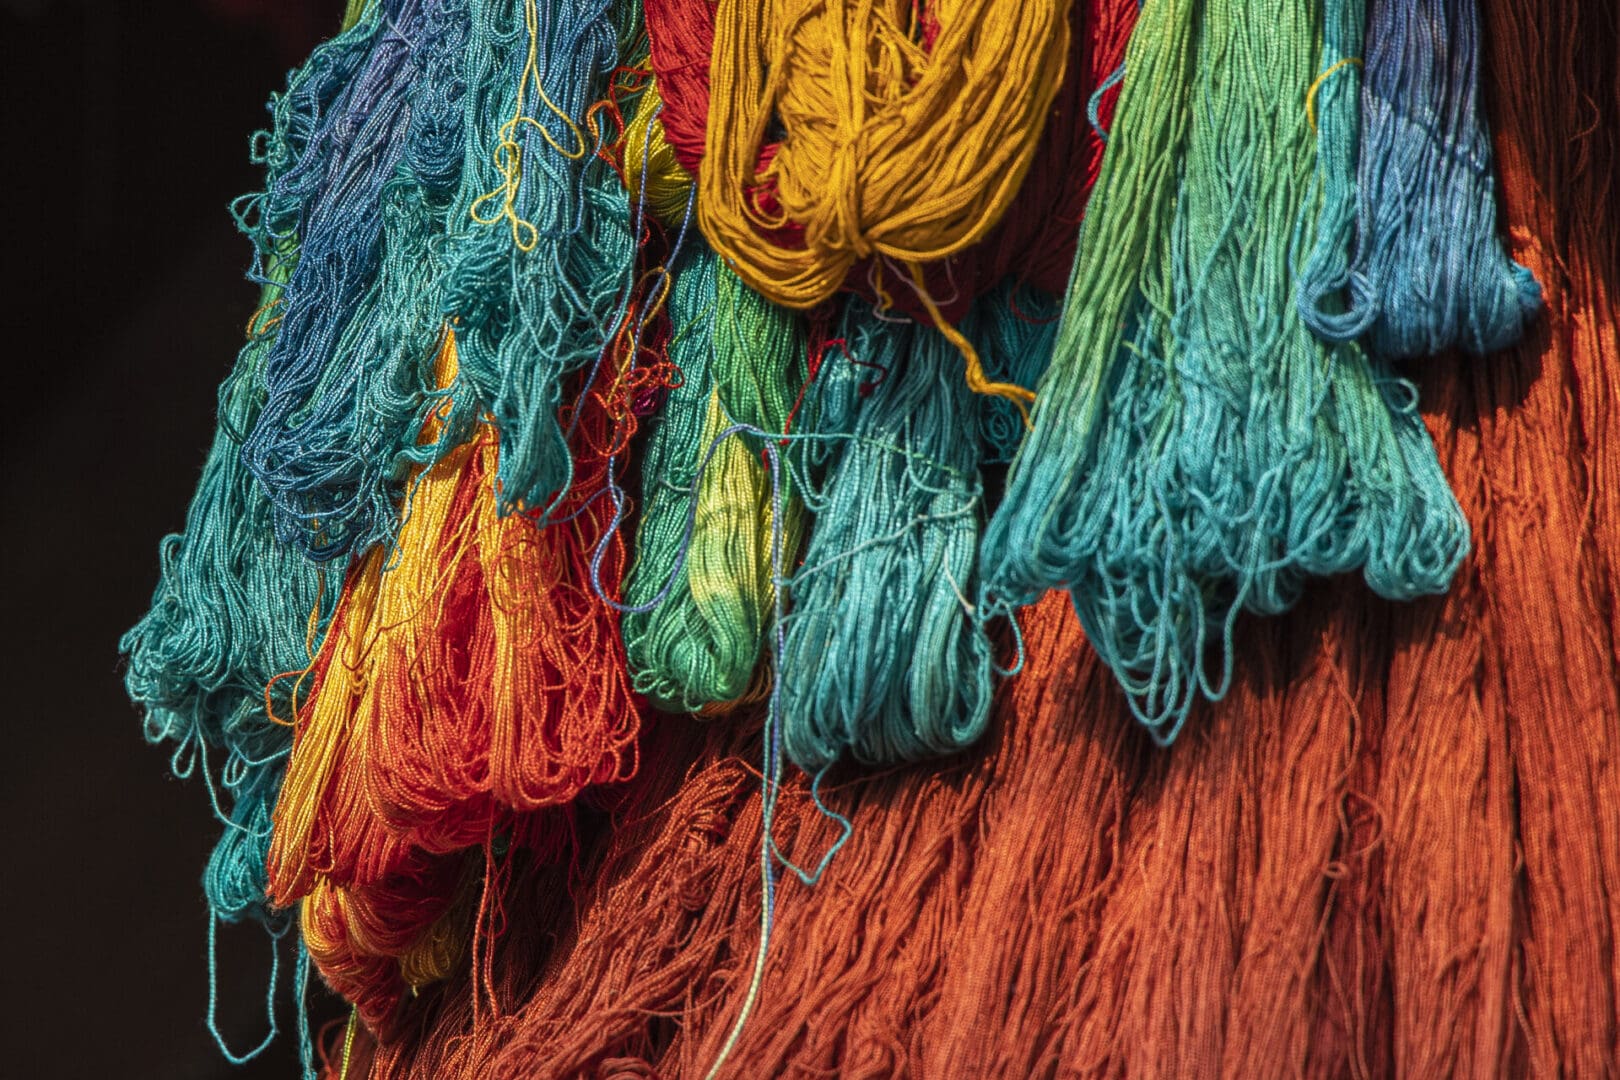 A close up of colorful yarn hanging on a wall.